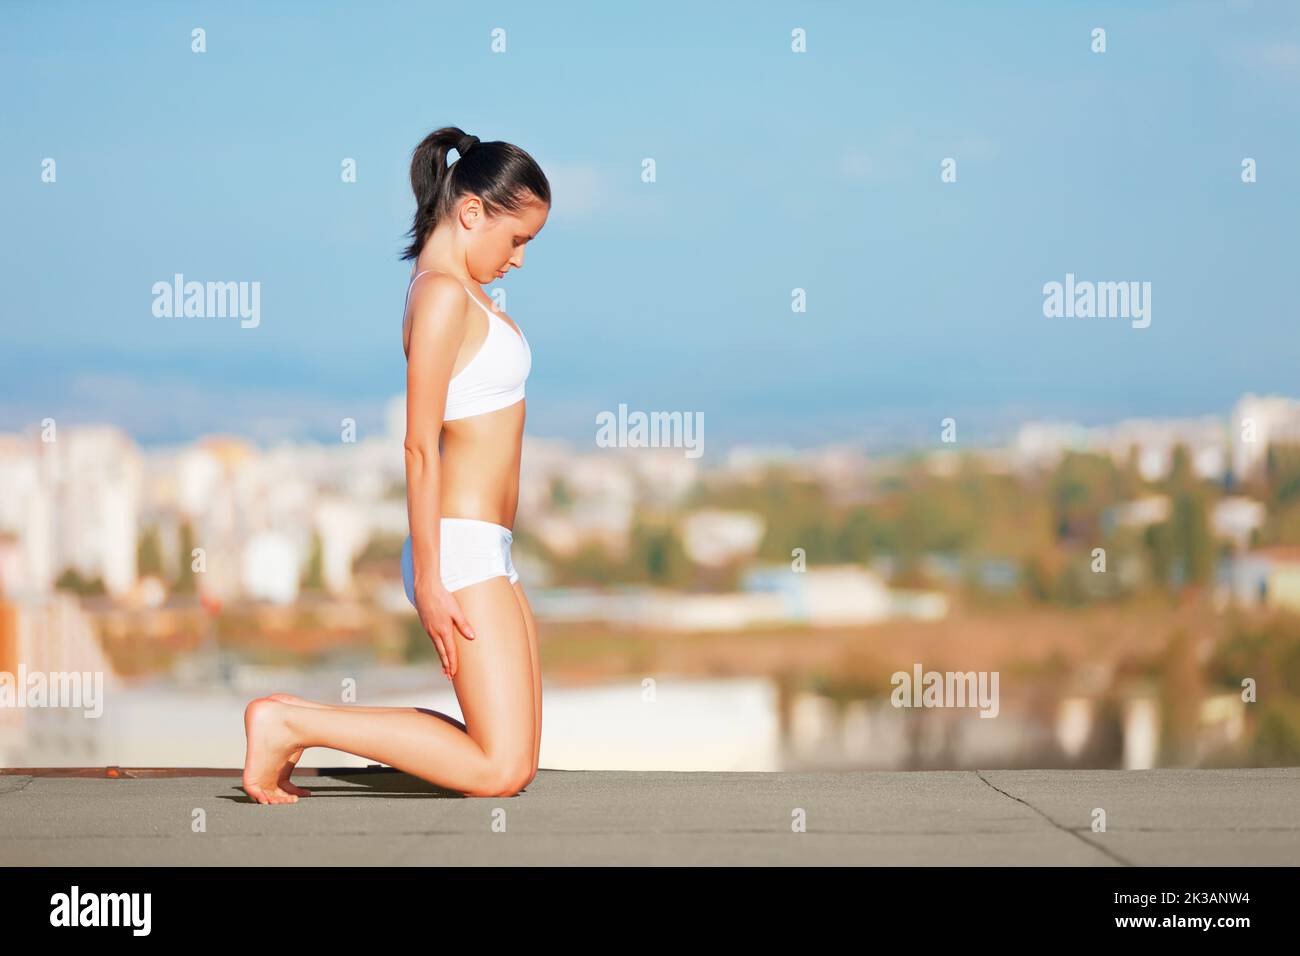 Finding her center with solitutde. an attractive young woman in workout gear doing yoga on a rooftop. Stock Photo